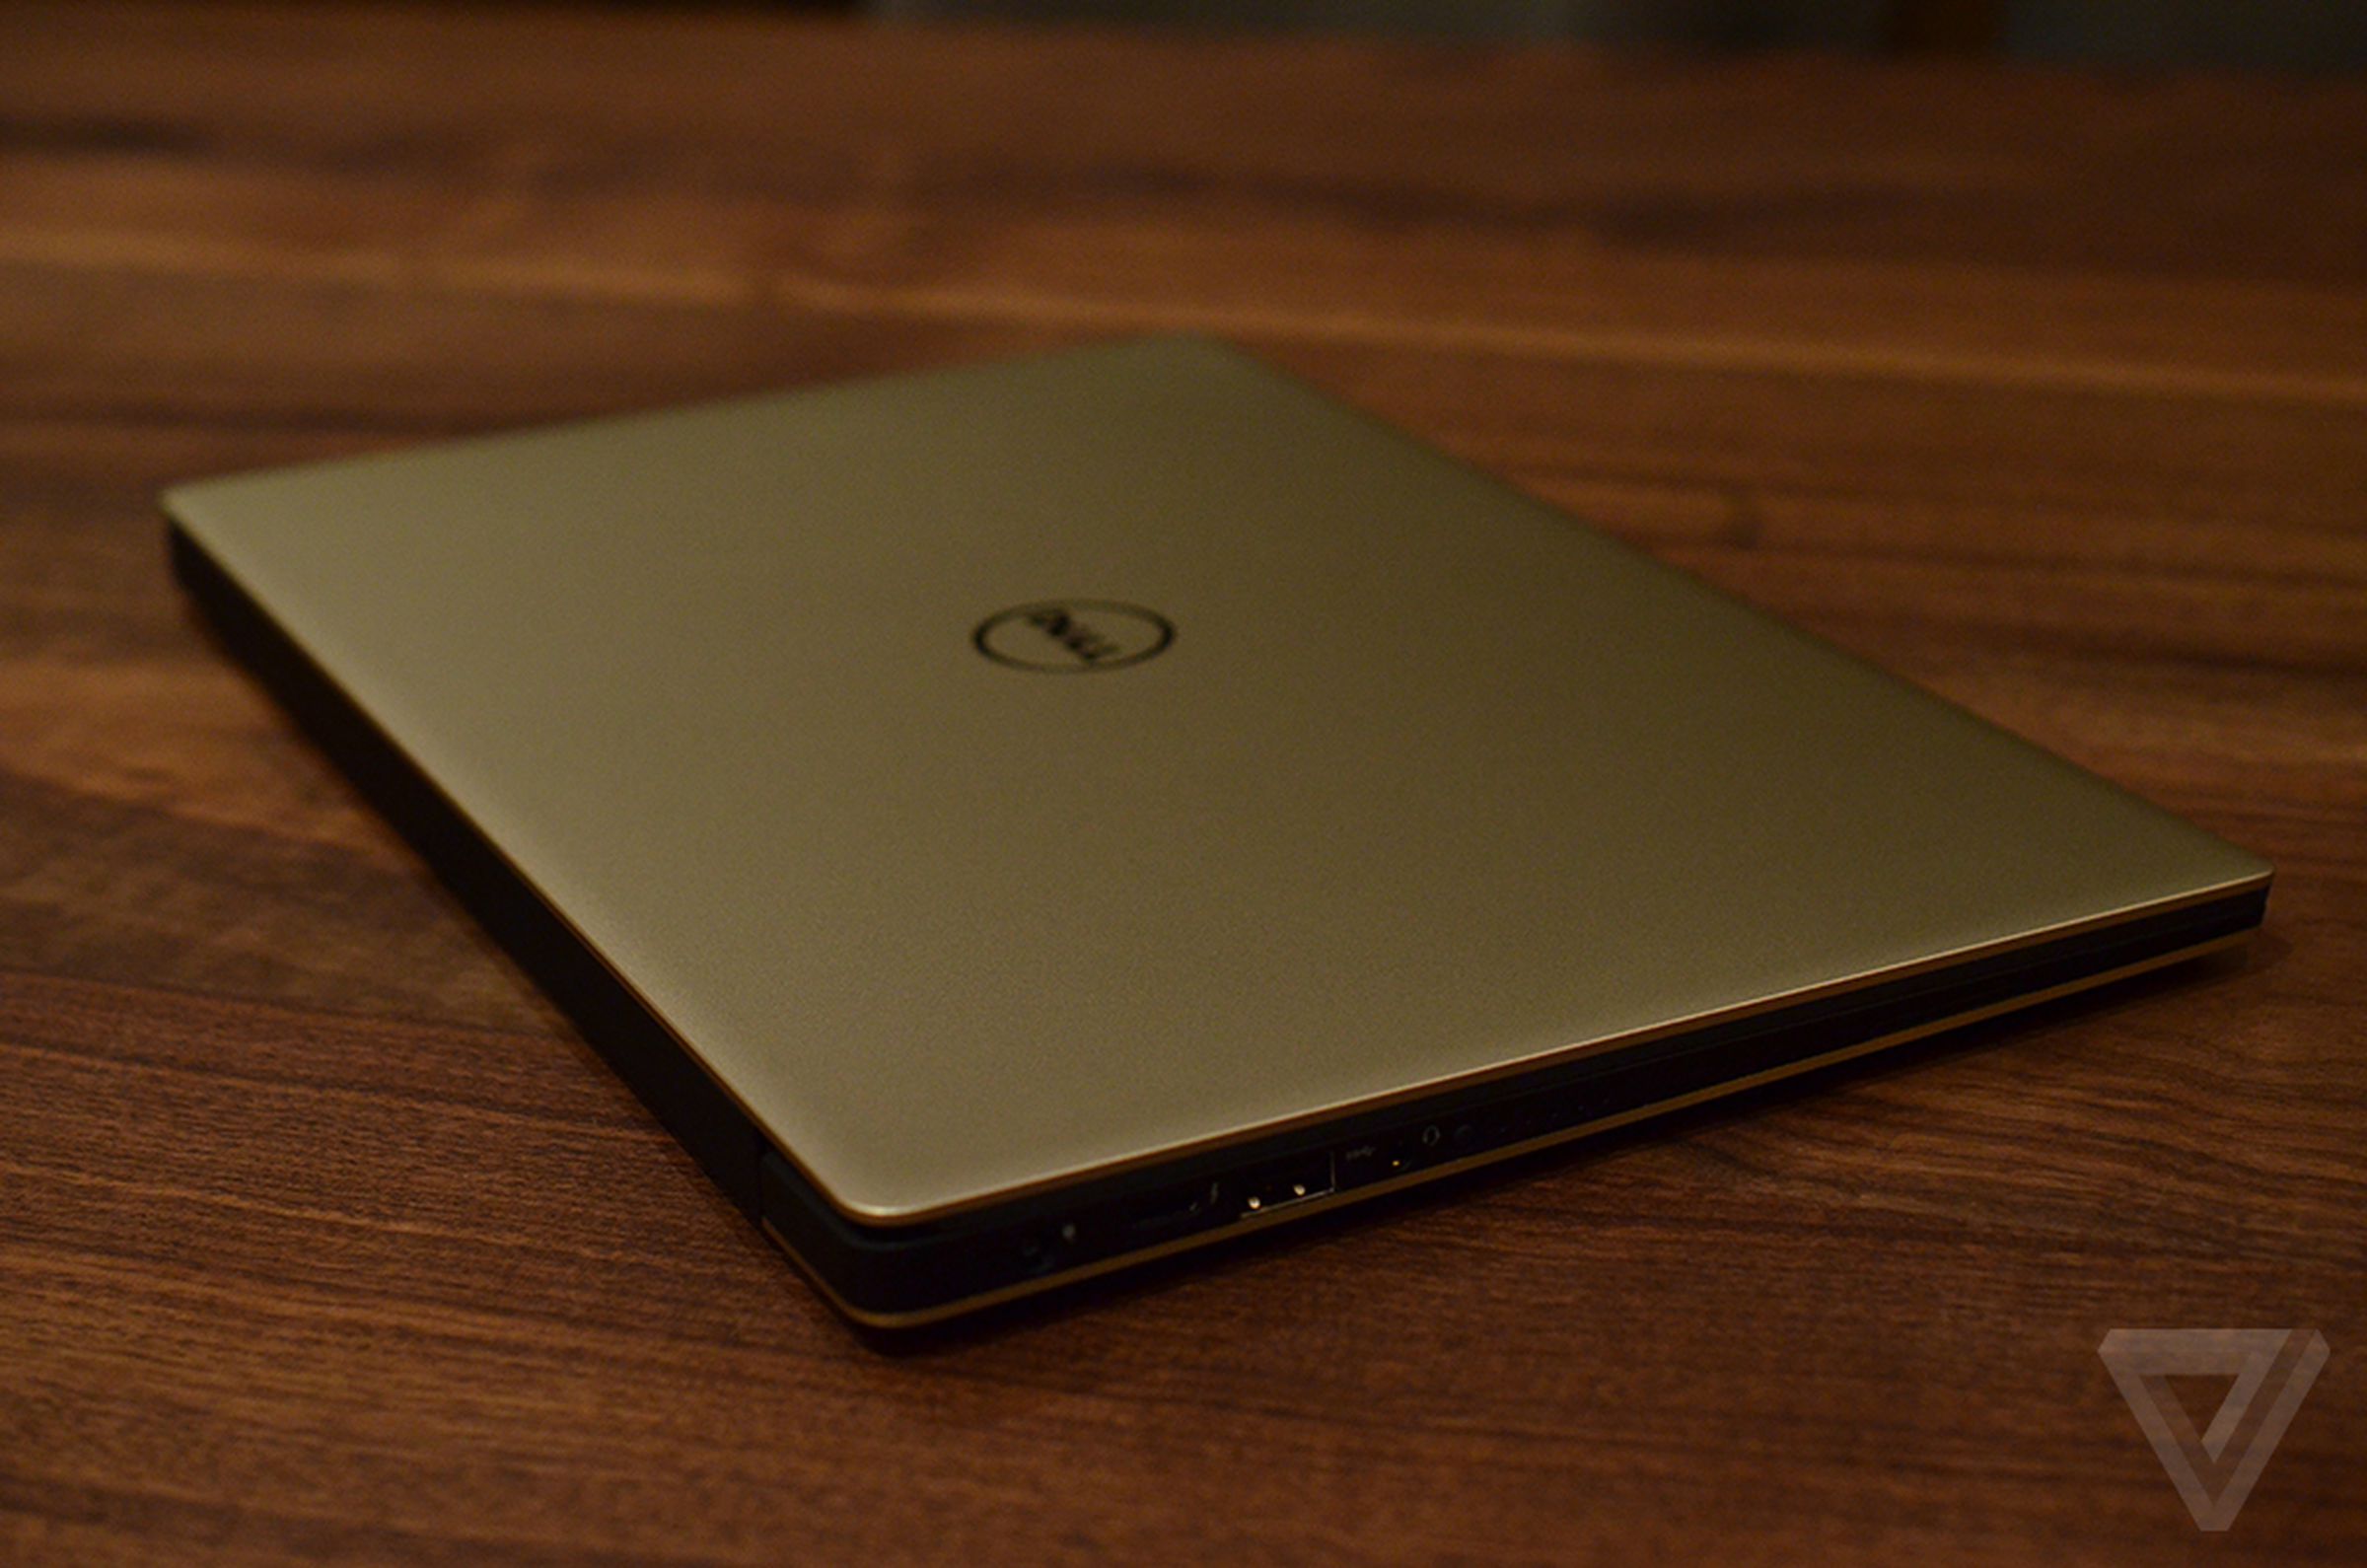 Dell XPS 13 gold edition hands-on photos